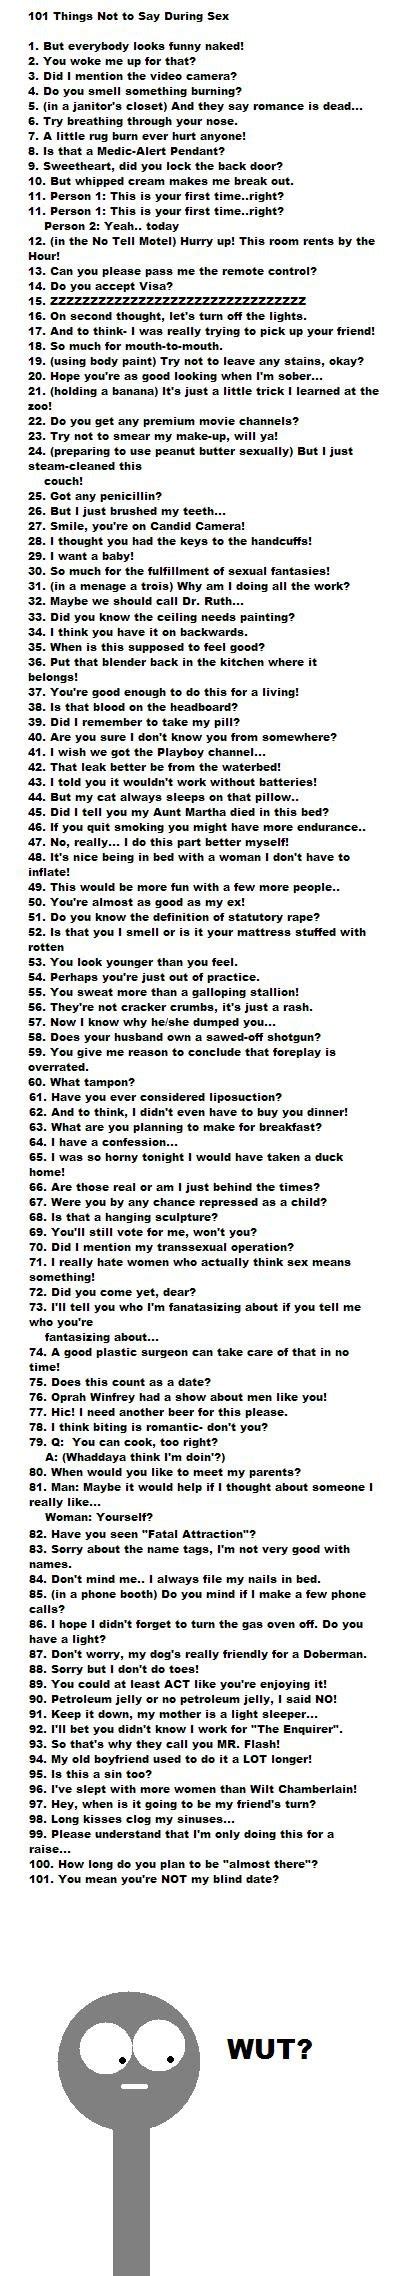 101 things not to say during sex